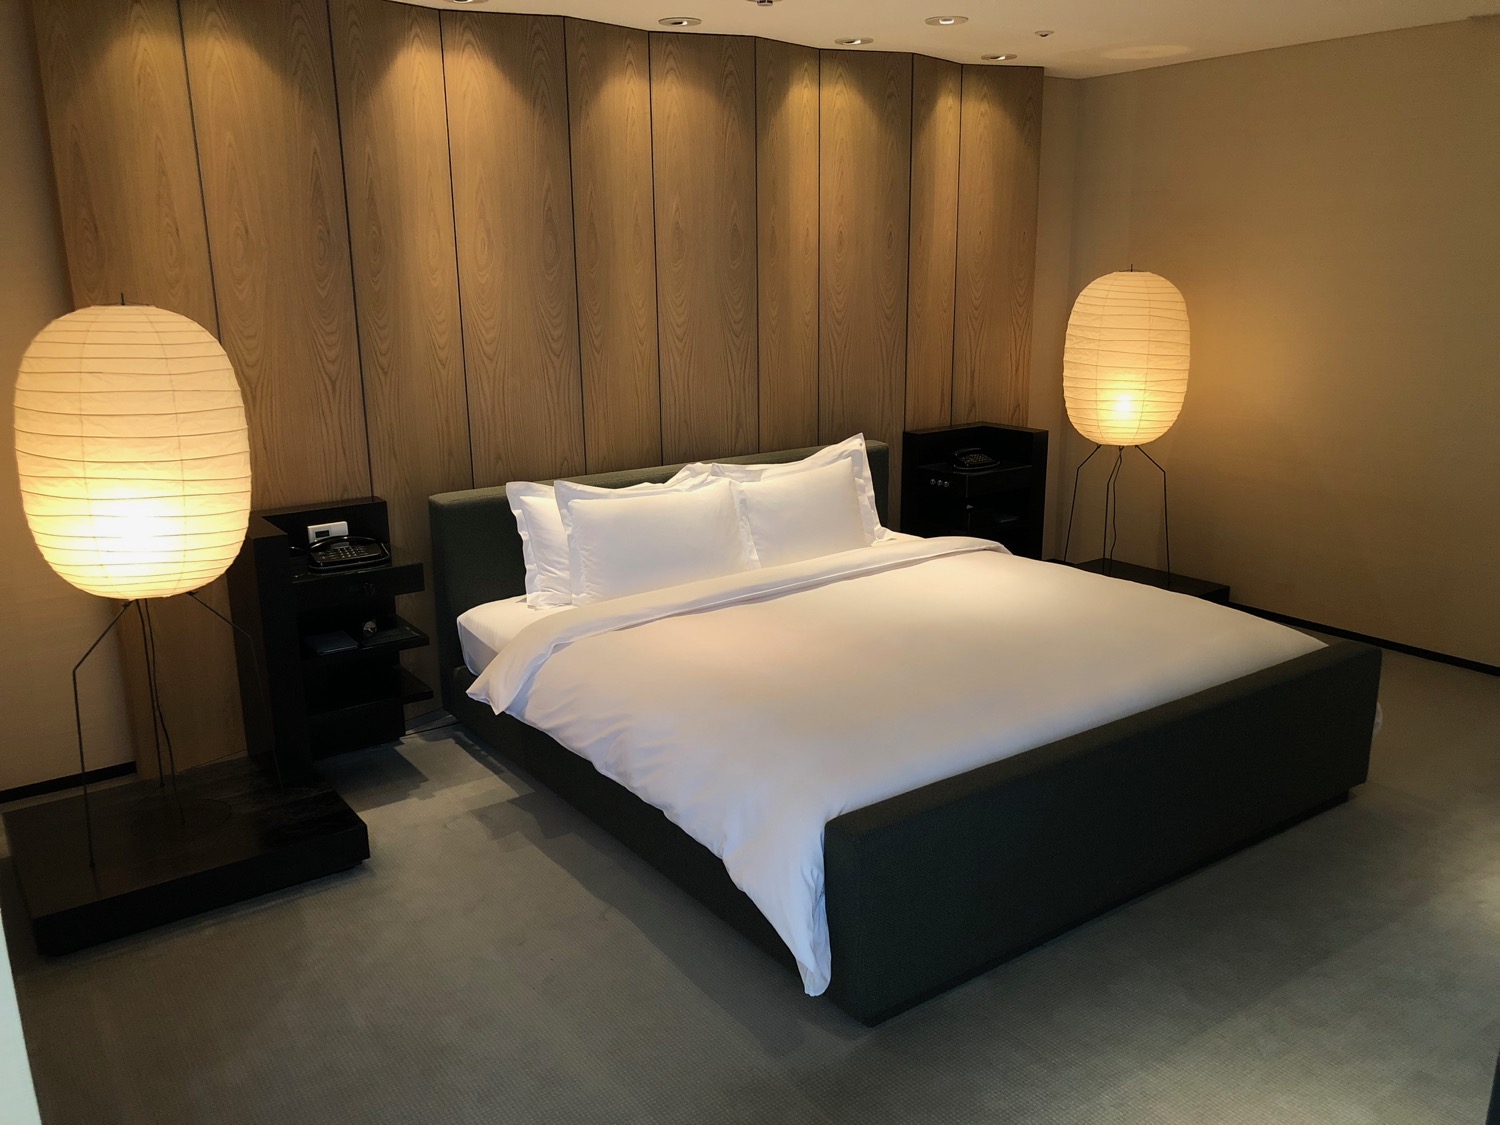 a bed with white sheets and pillows in a room with wood paneled walls